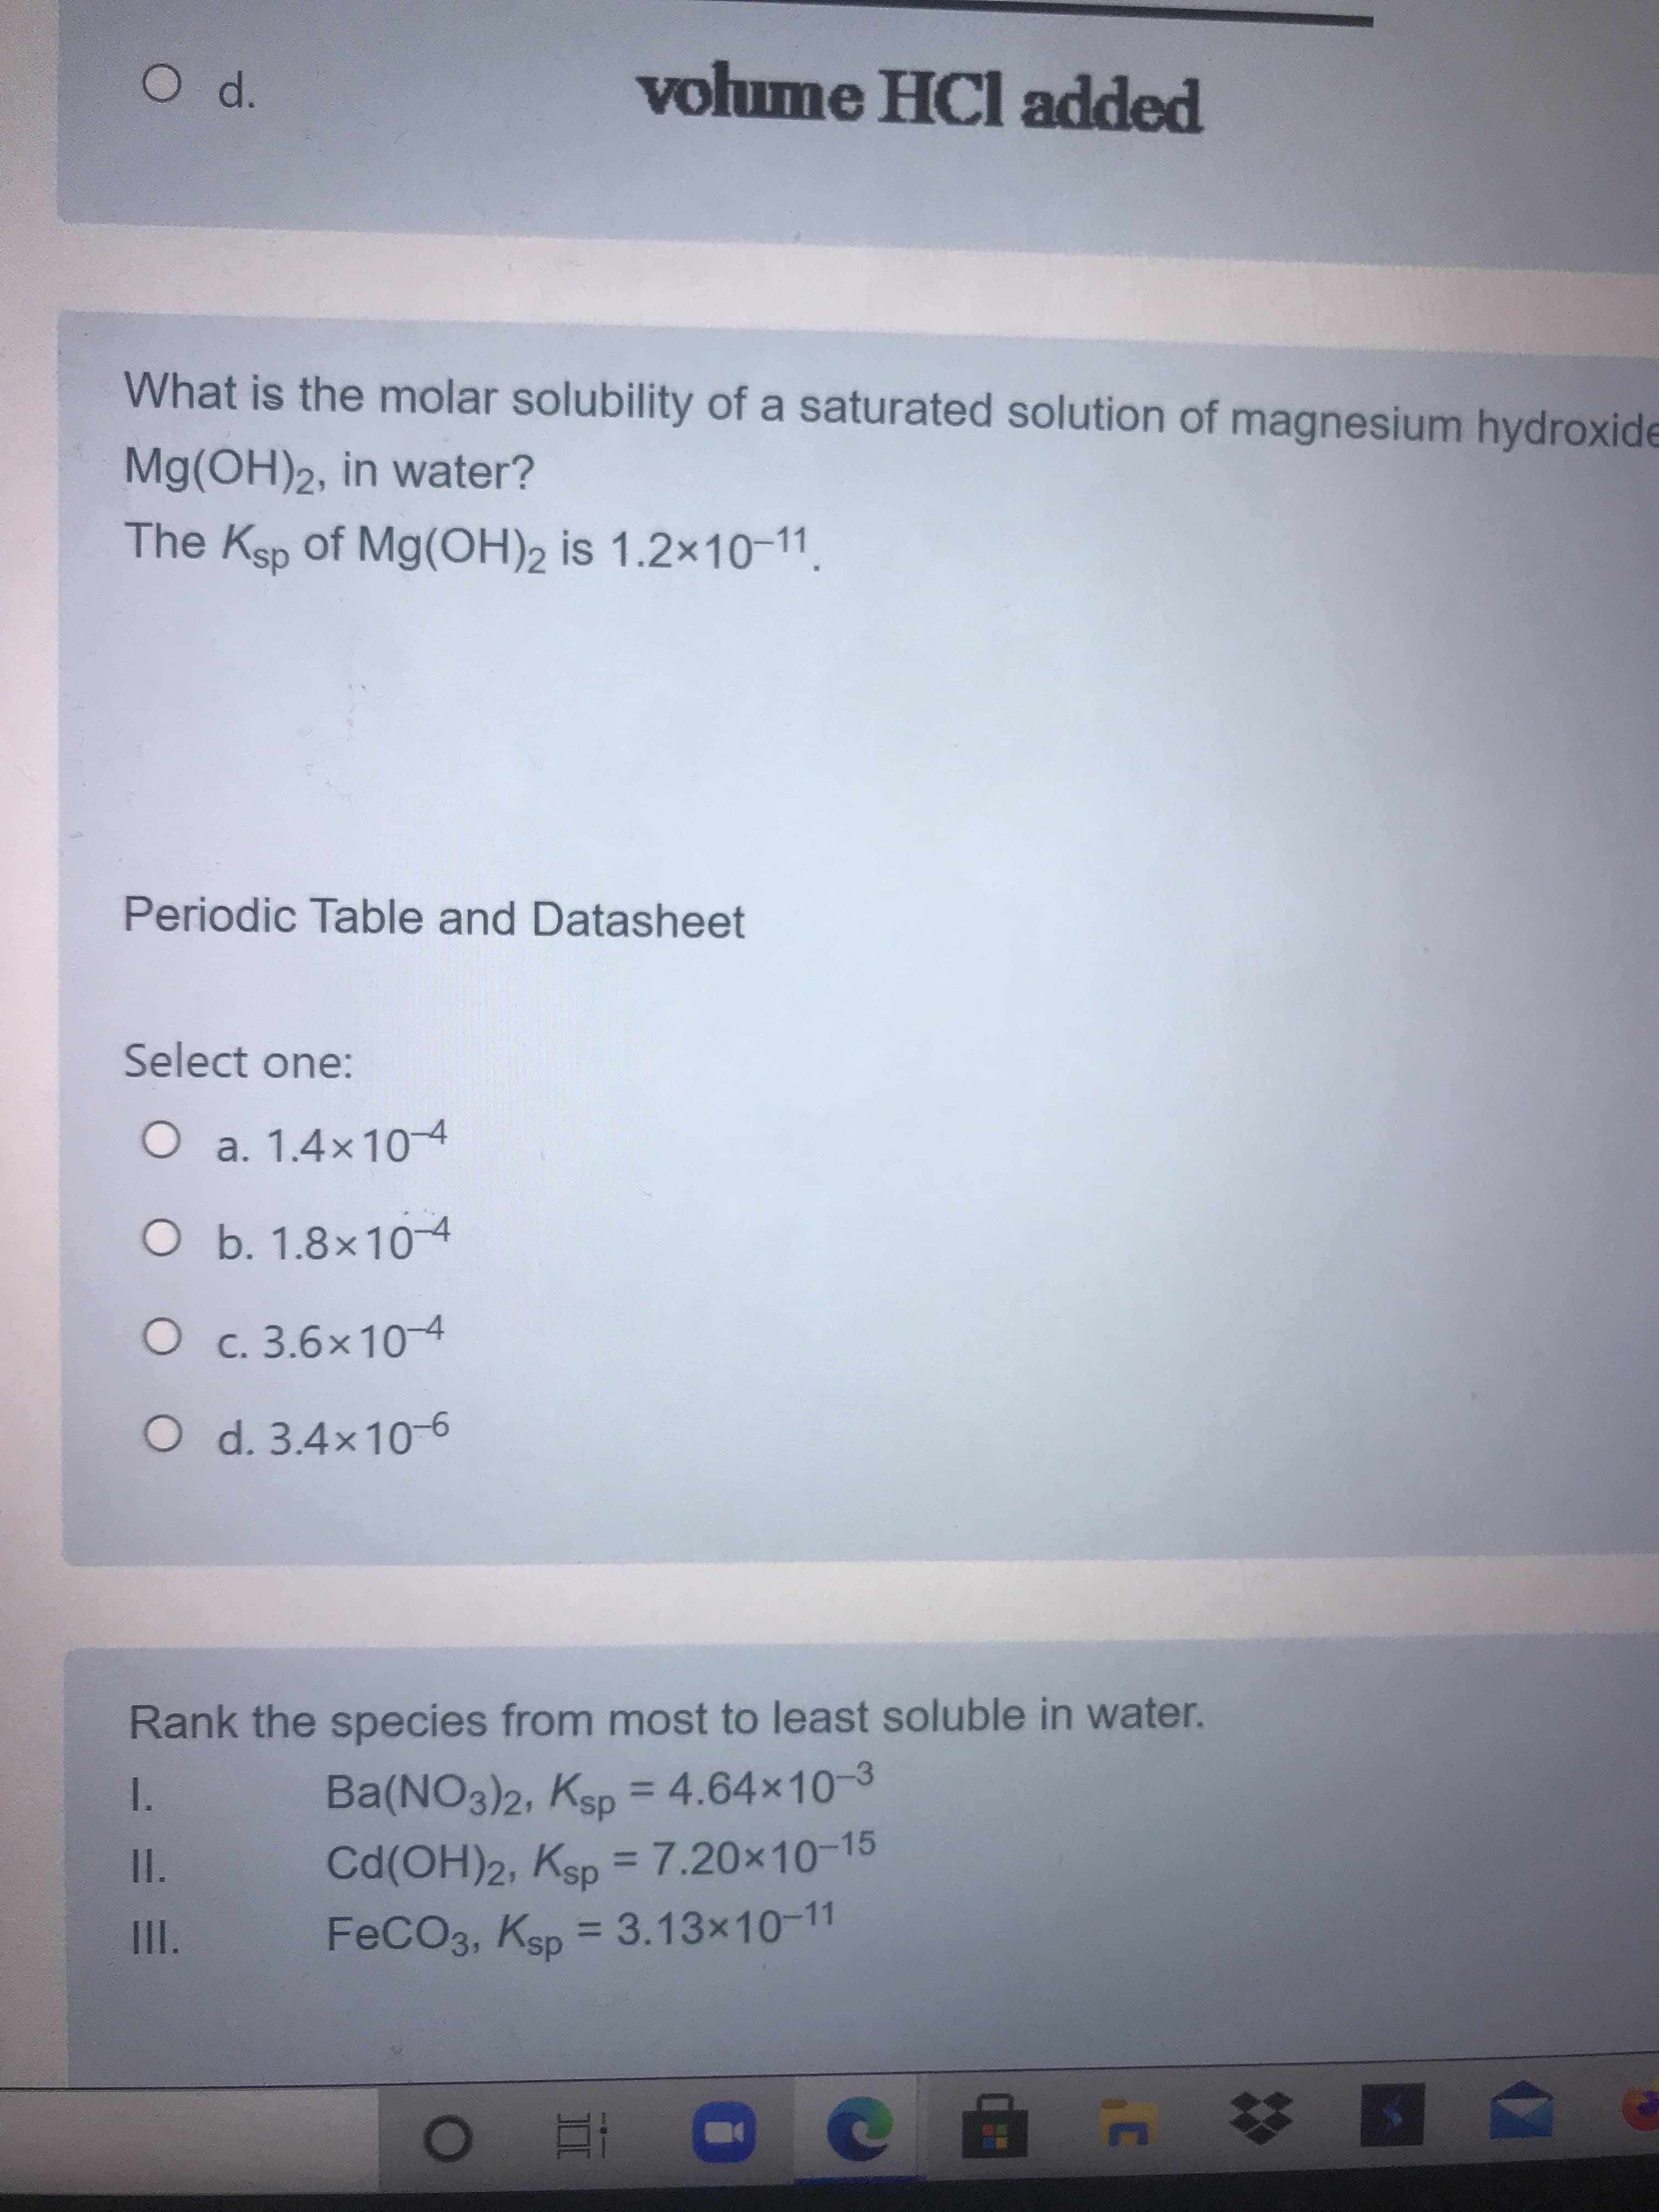 What is the molar solubility of a saturated solution of magnesium hydroxic
Mg(OH)2, in water?
The Ksp of Mg(OH)2 is 1.2x10-11.
Periodic Table and Datasheet
Select one:
